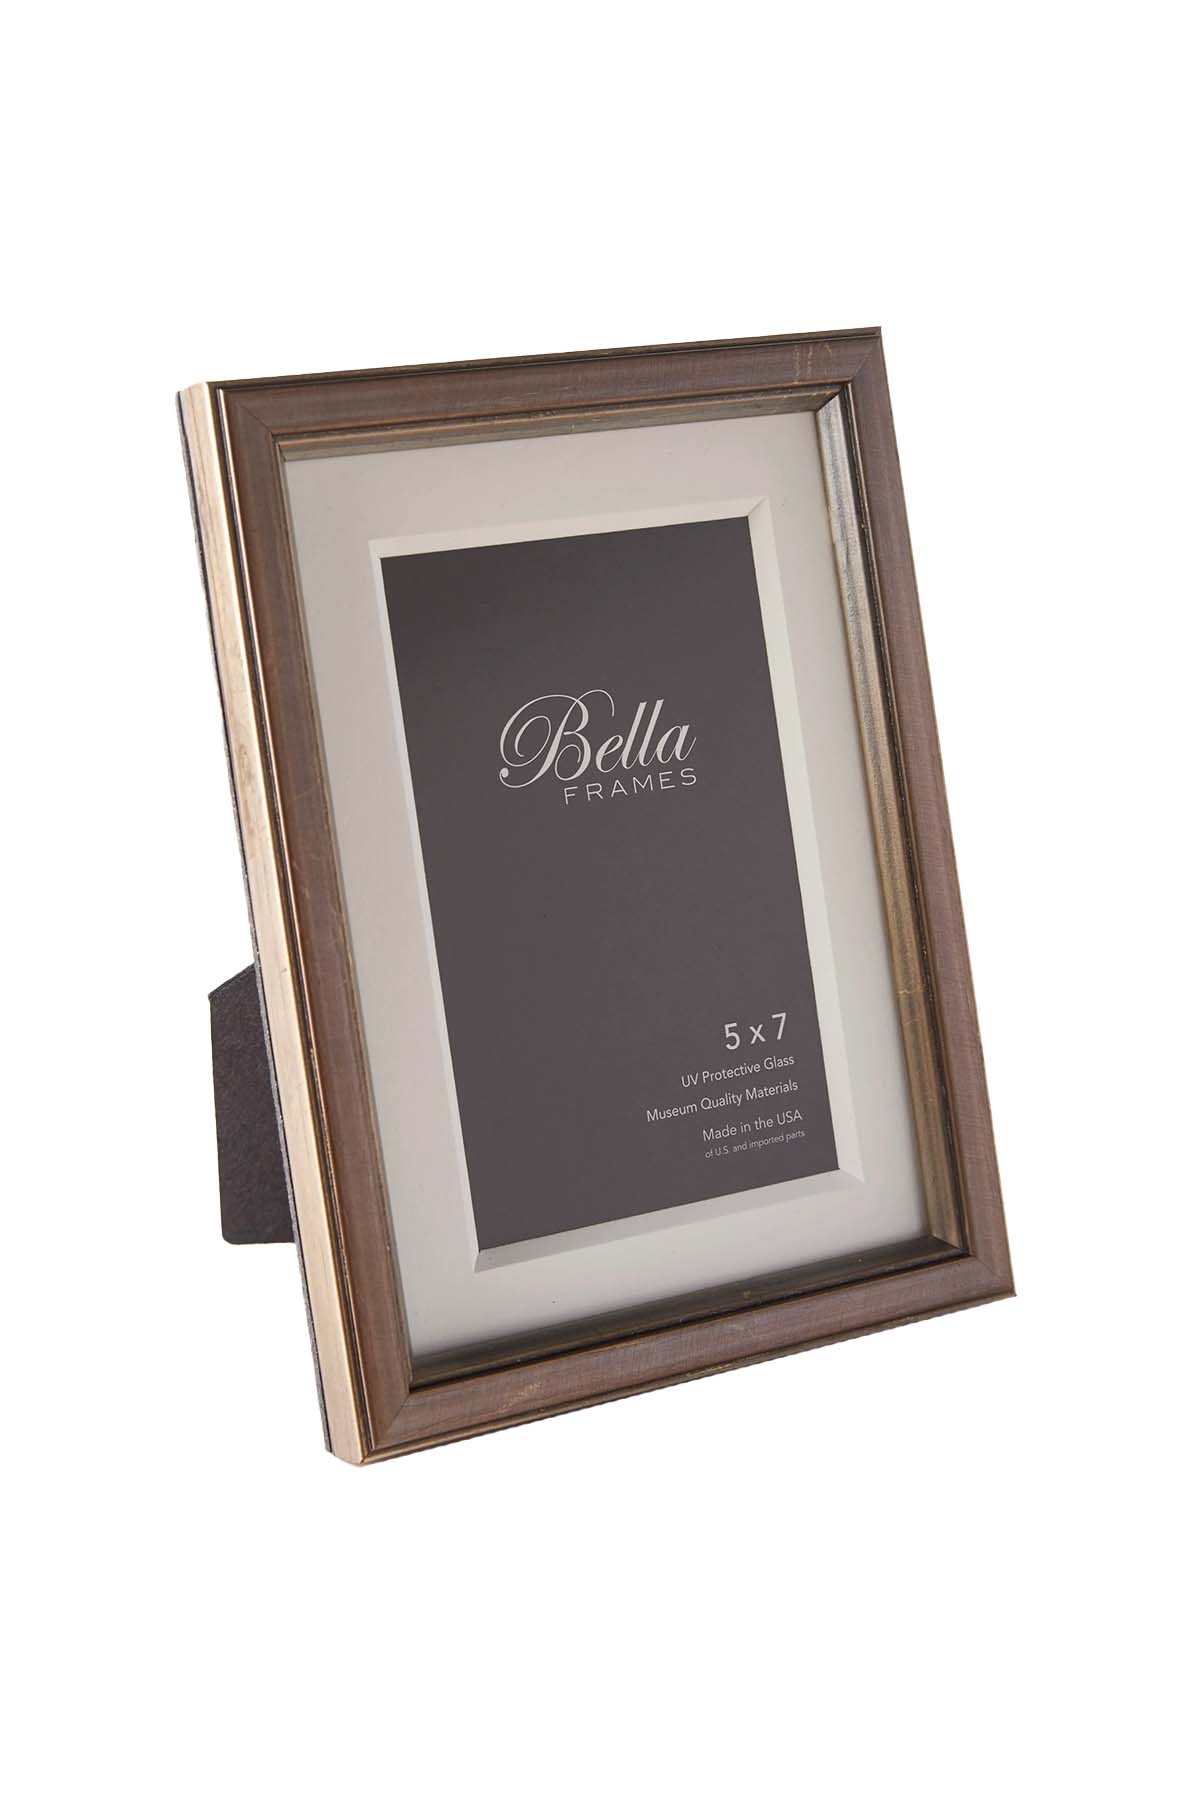 Brancui Piombo 5x7 pewter-colored frame - Side view